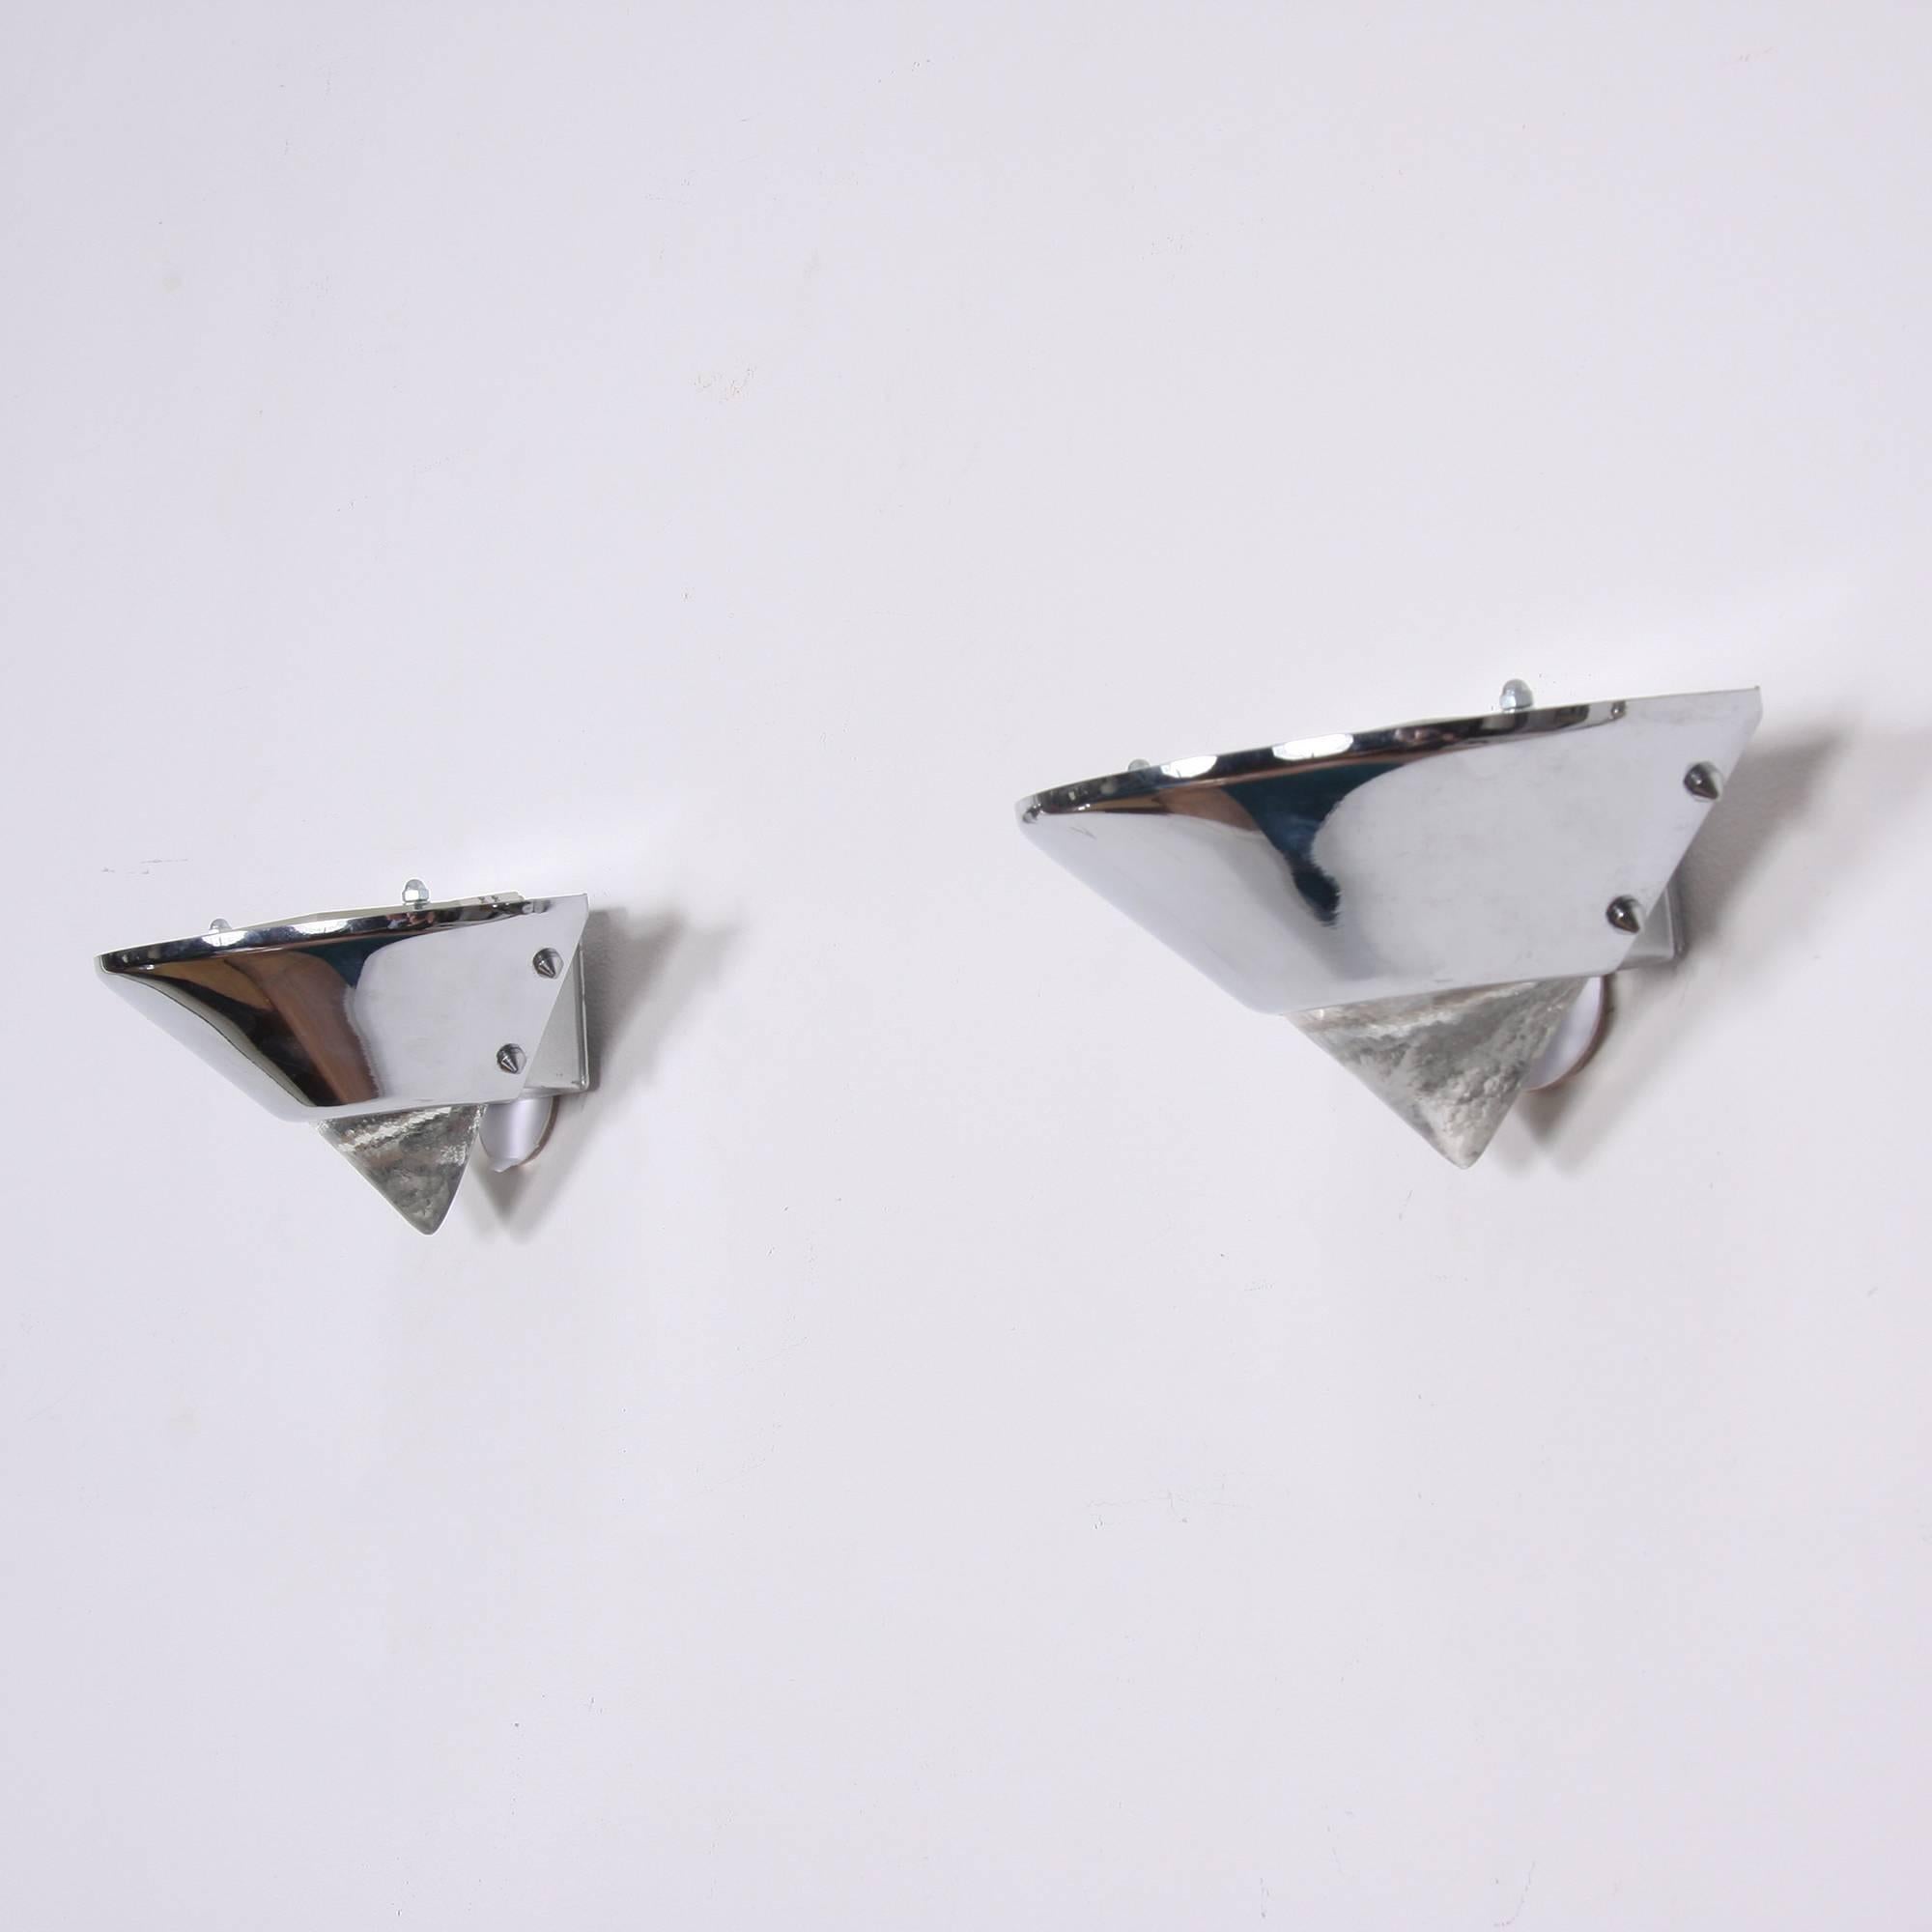 German, circa 1980

A pair of uplighter wall lights in a triangular shape. Solid glass on the lower part with a chromed metal upper part. Includes re-wiring.